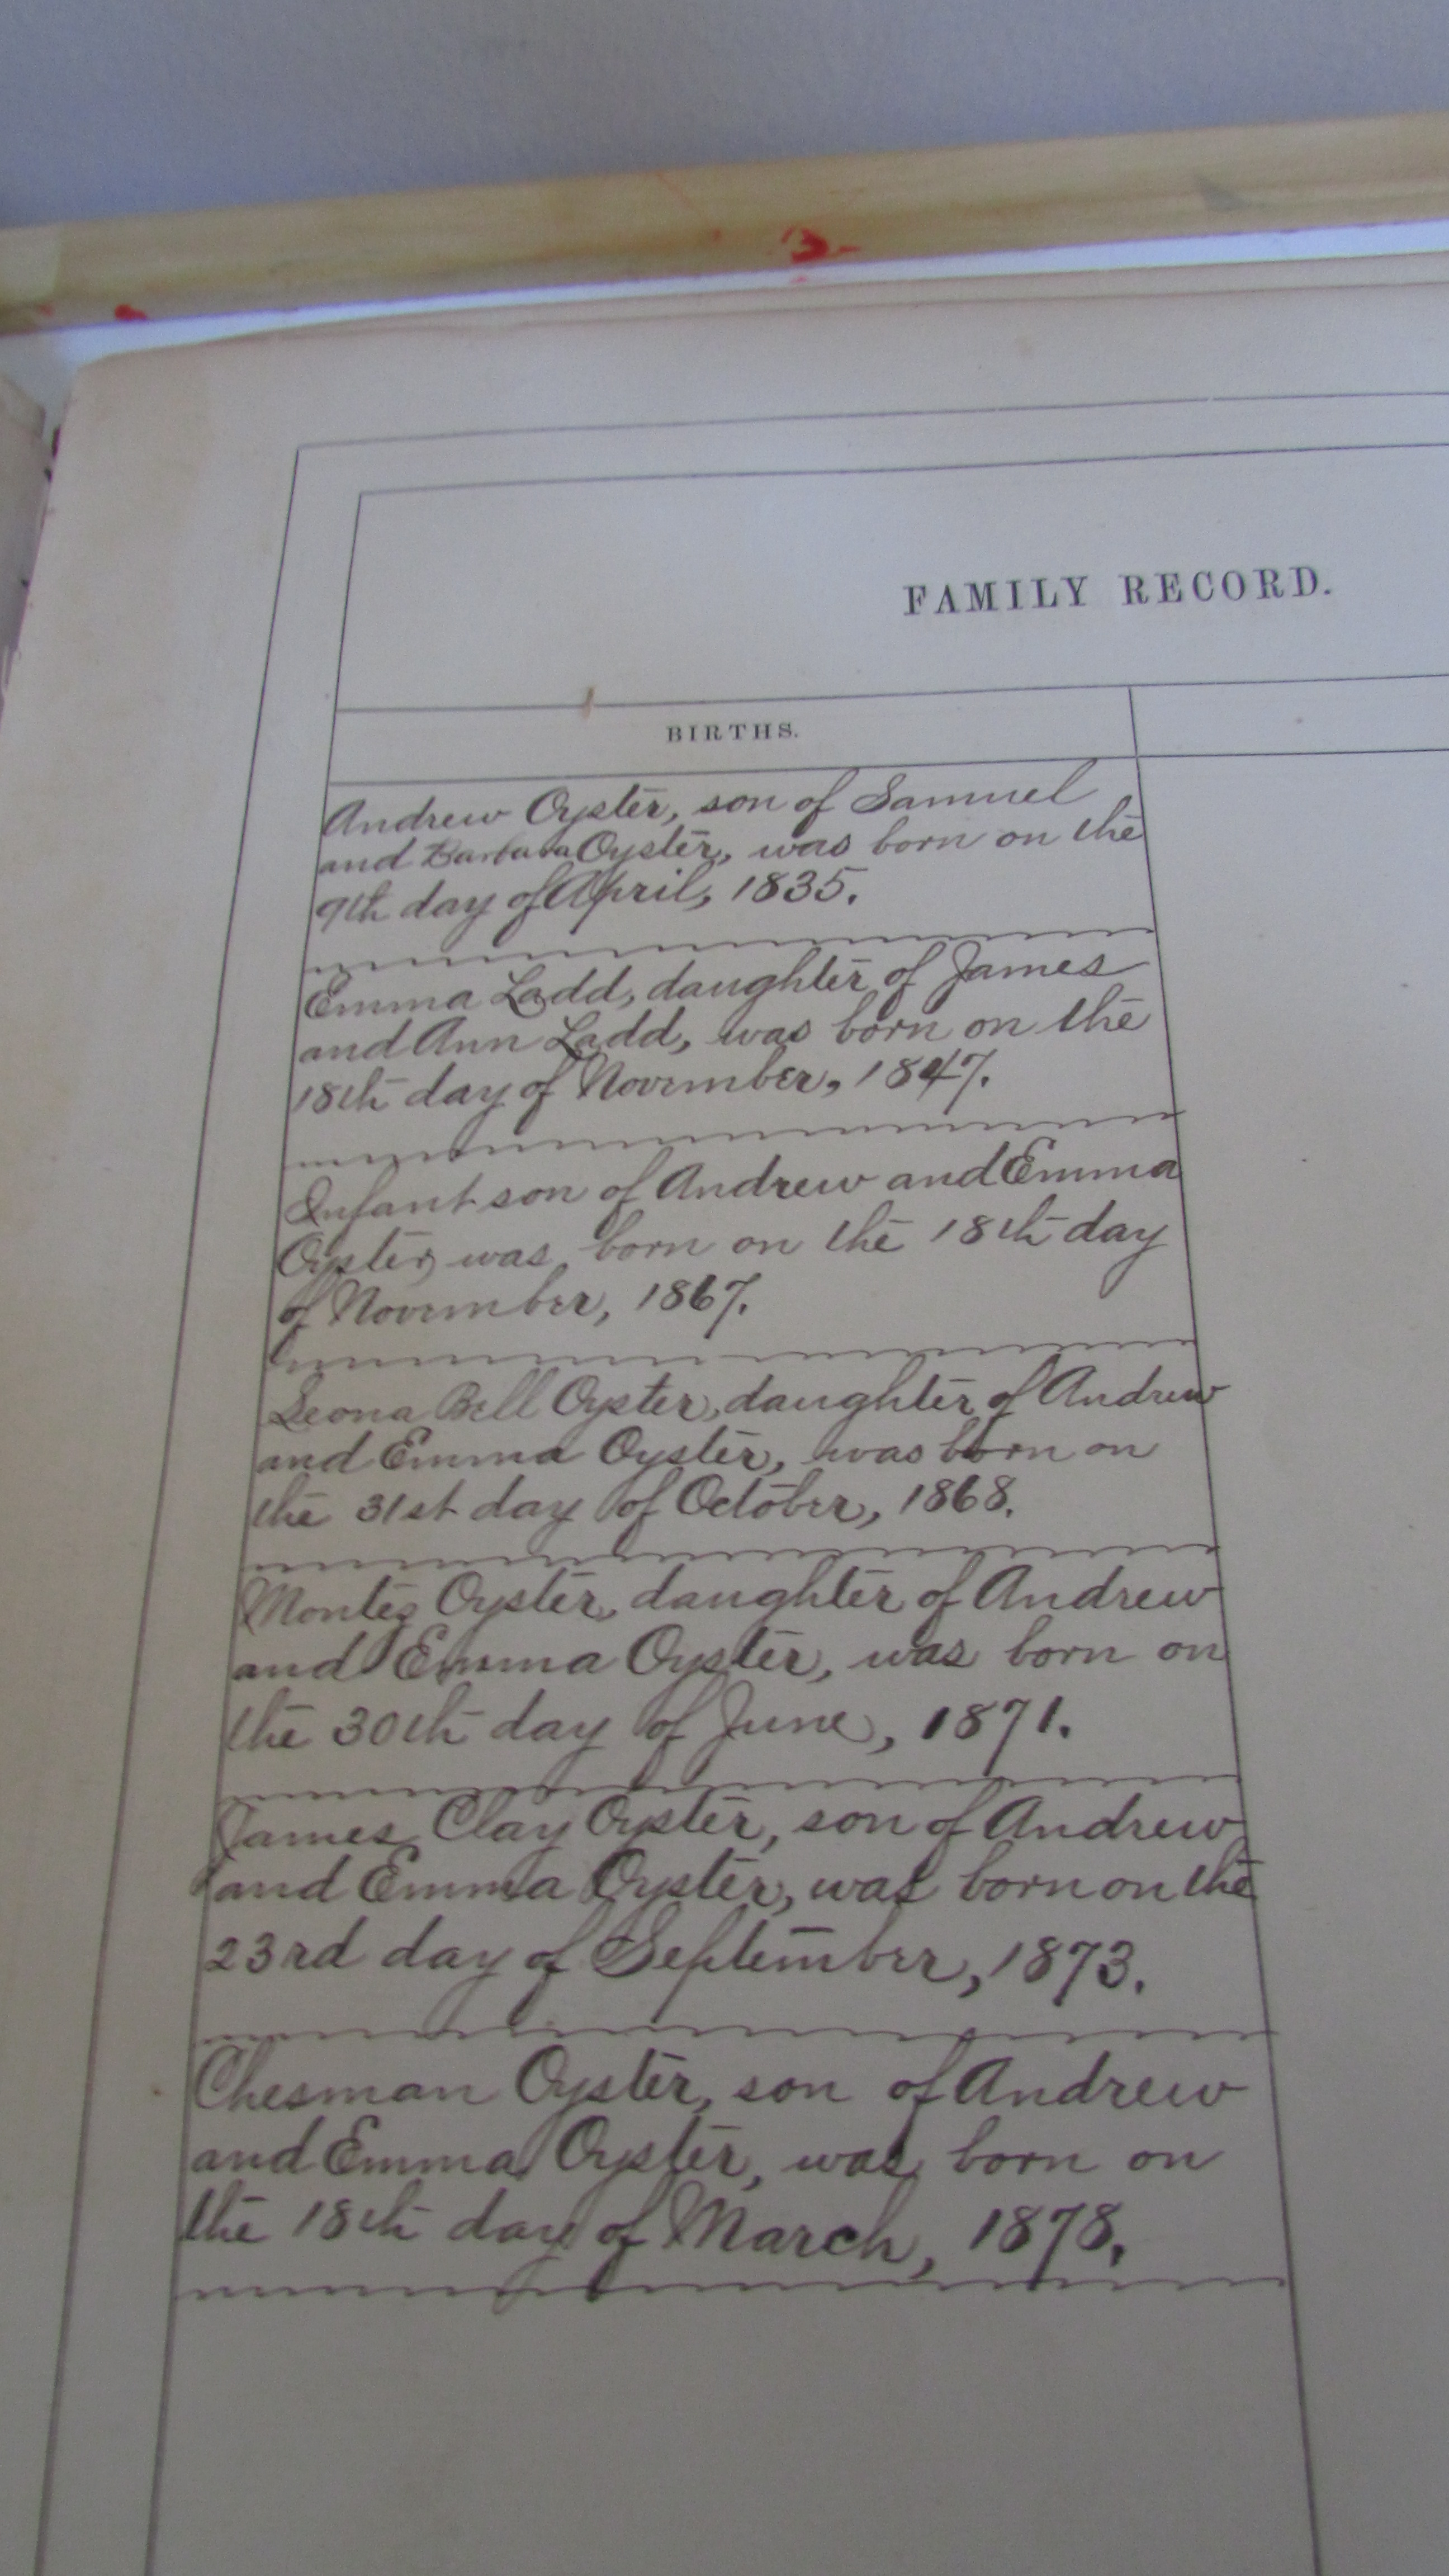 Second inscribed Family Record page - closeup